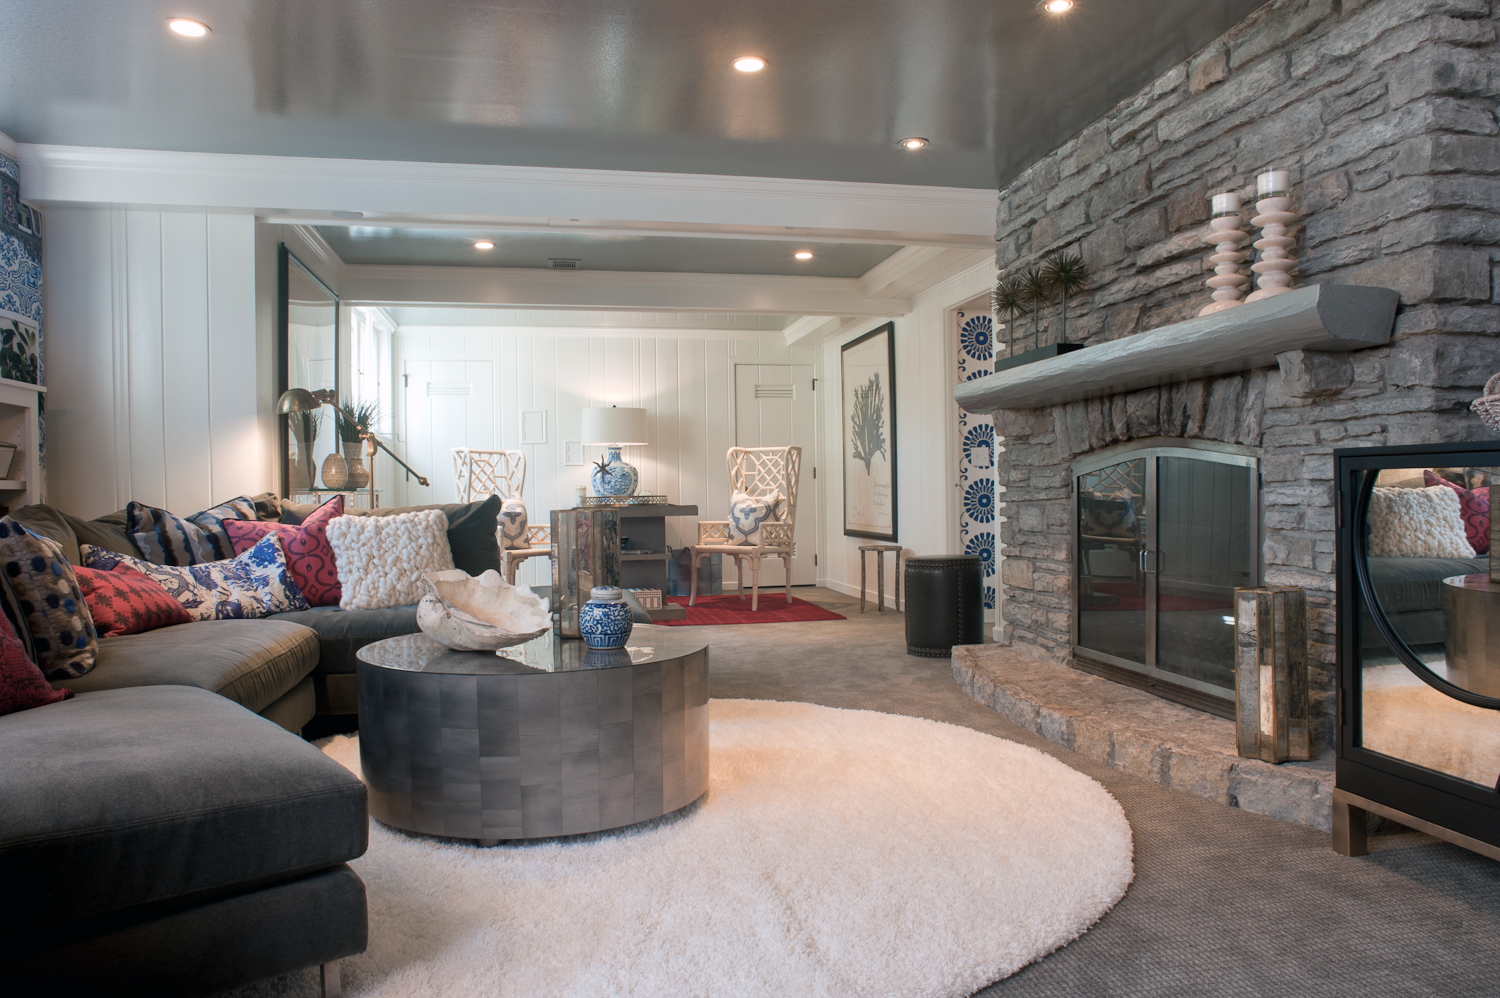 The family room, 2014 ASID Showcase Home